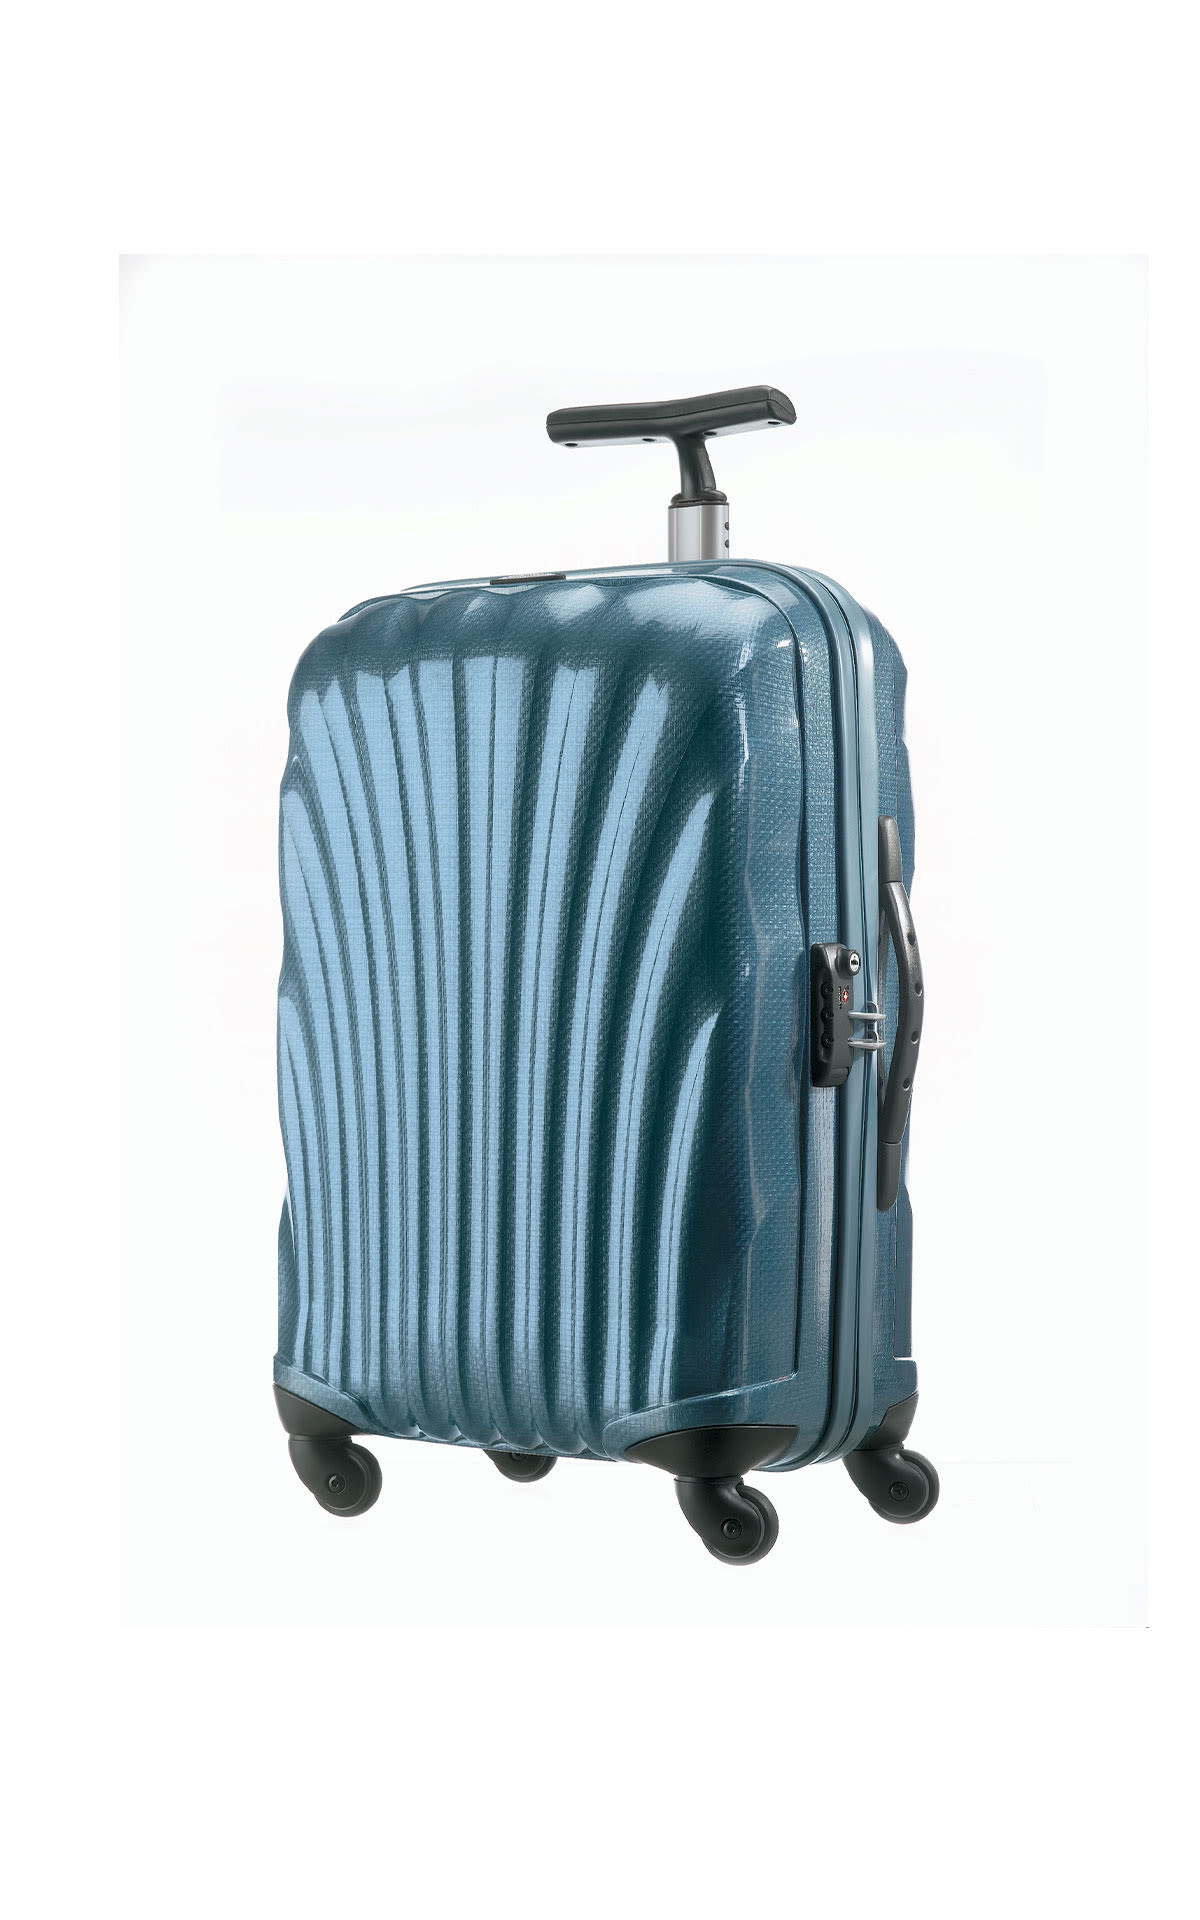 Samsonite Cosmolite 55cm carry on suitcase from Bicester Village